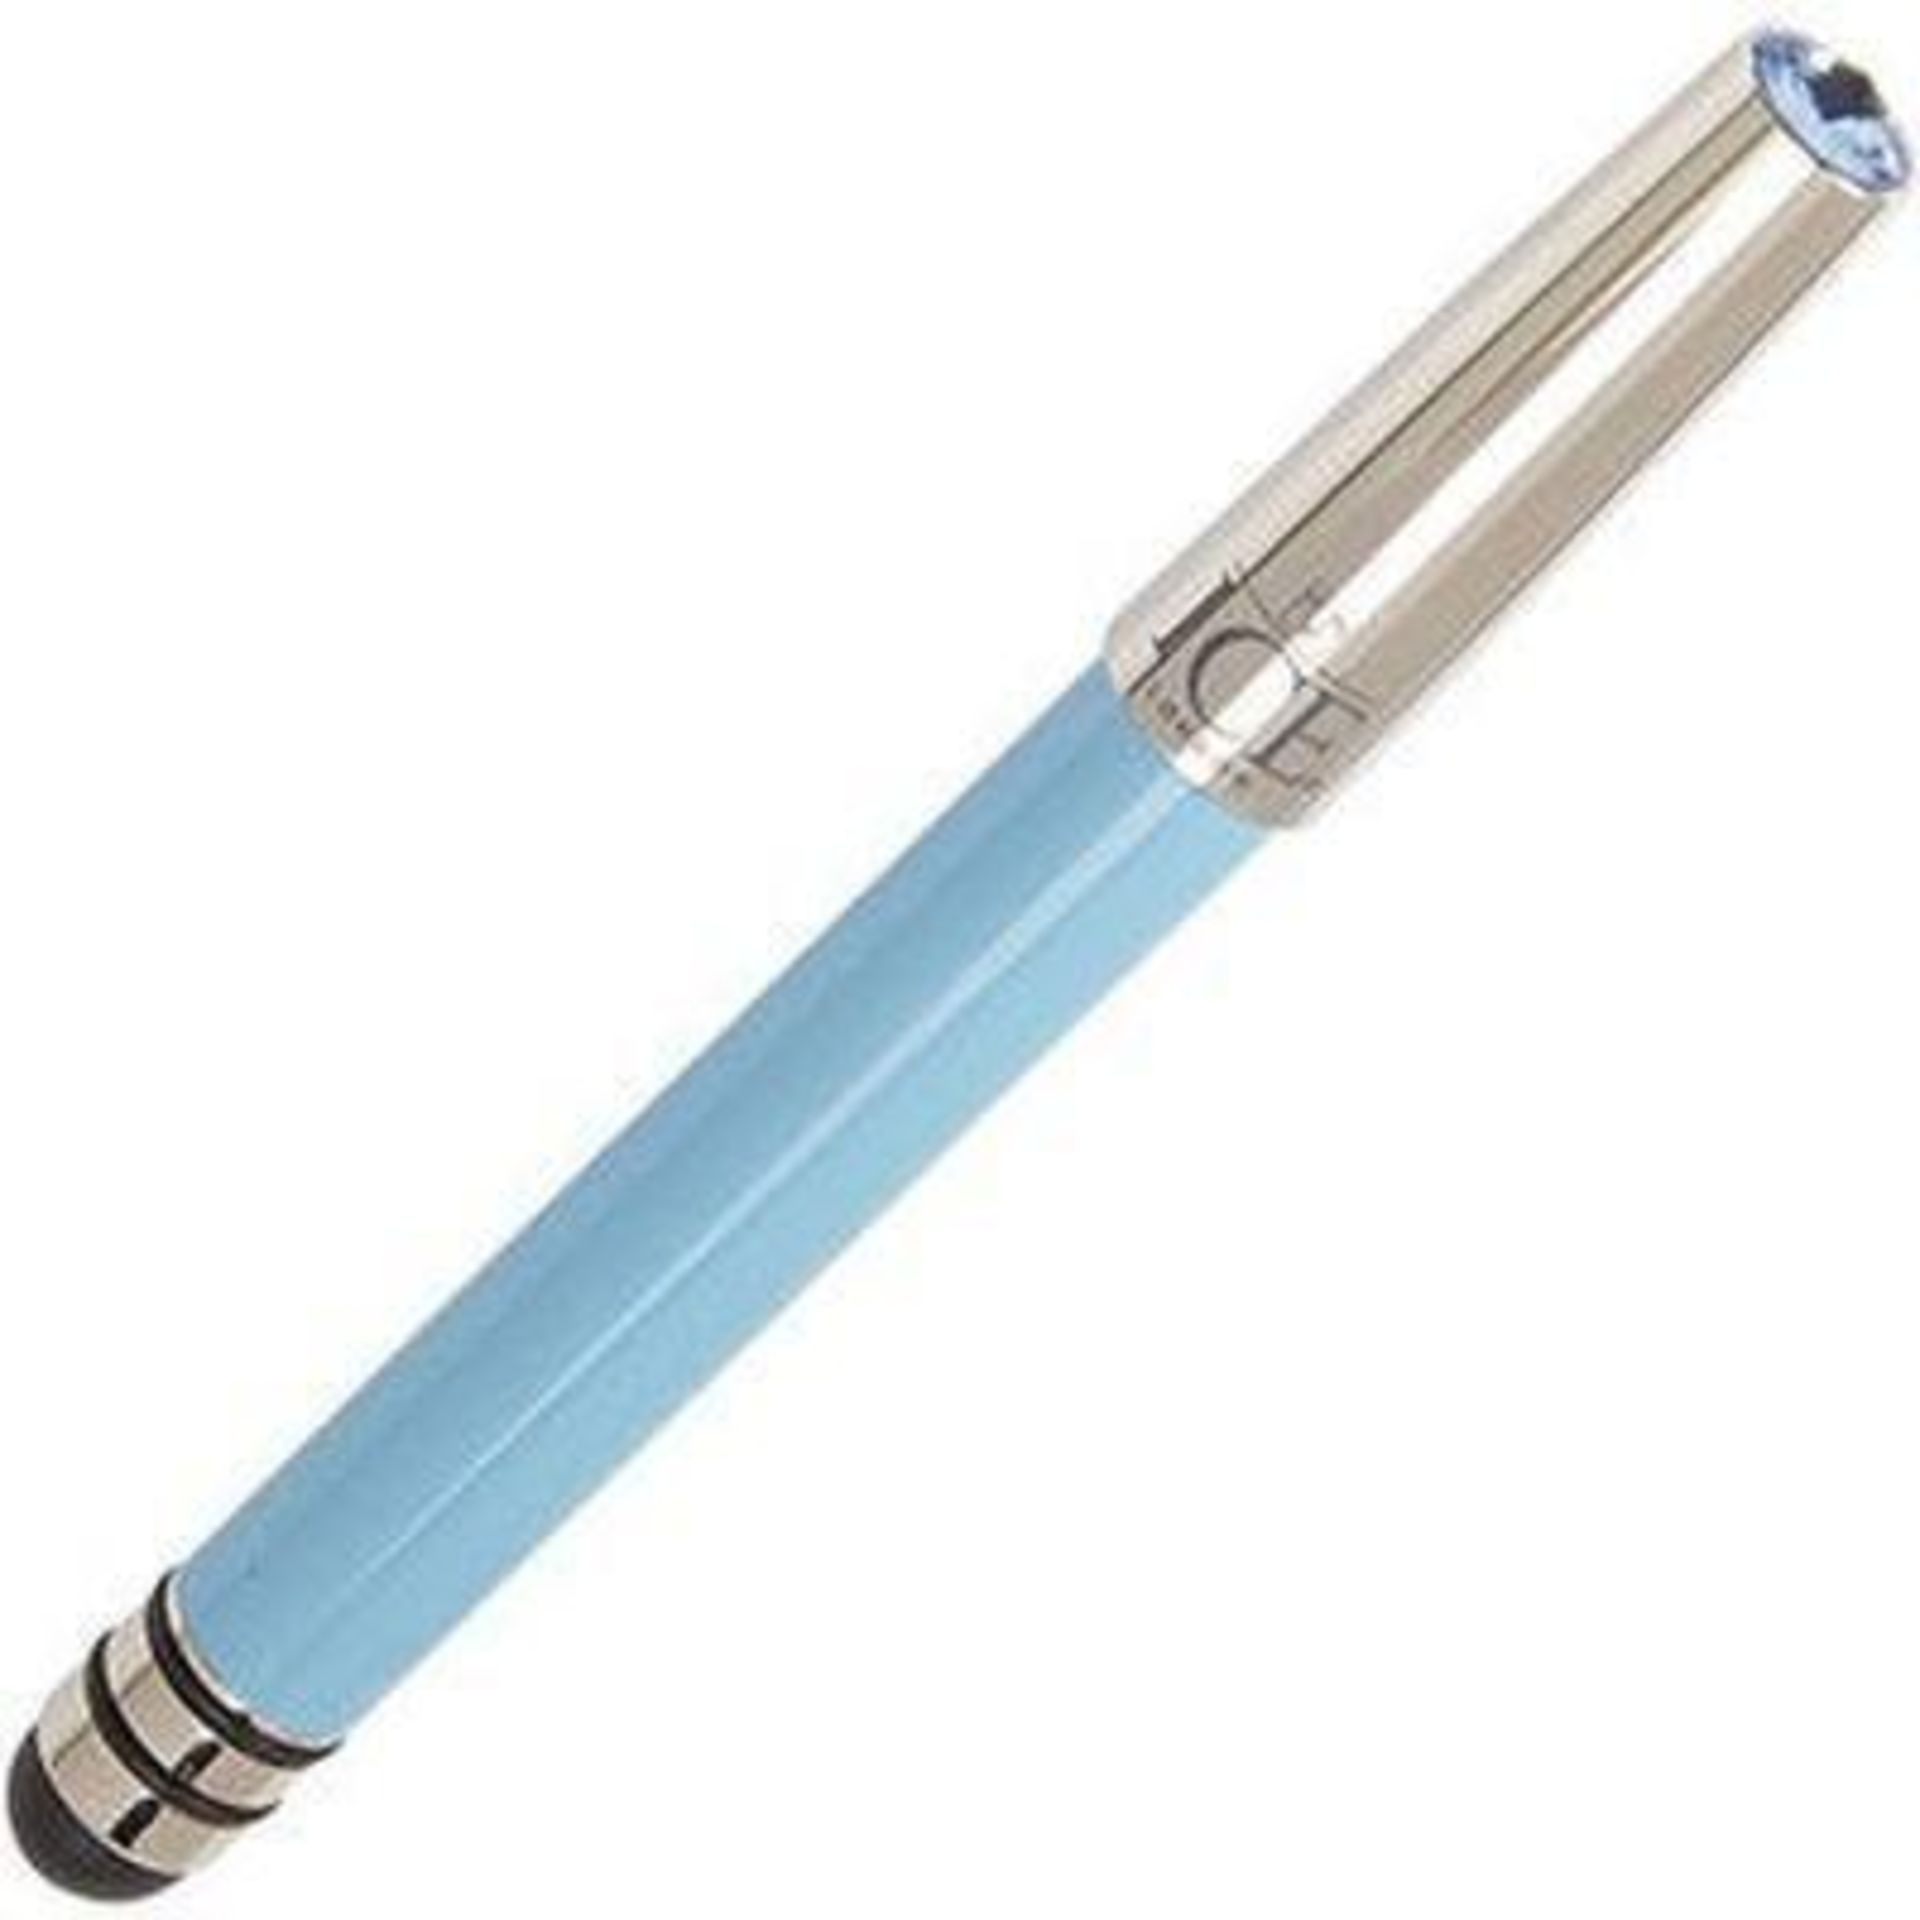 10 x ICE LONDON App Pen Duo - Touch Stylus And Ink Pen Combined - Colour: LIGHT BLUE - MADE WITH SWA - Image 4 of 4